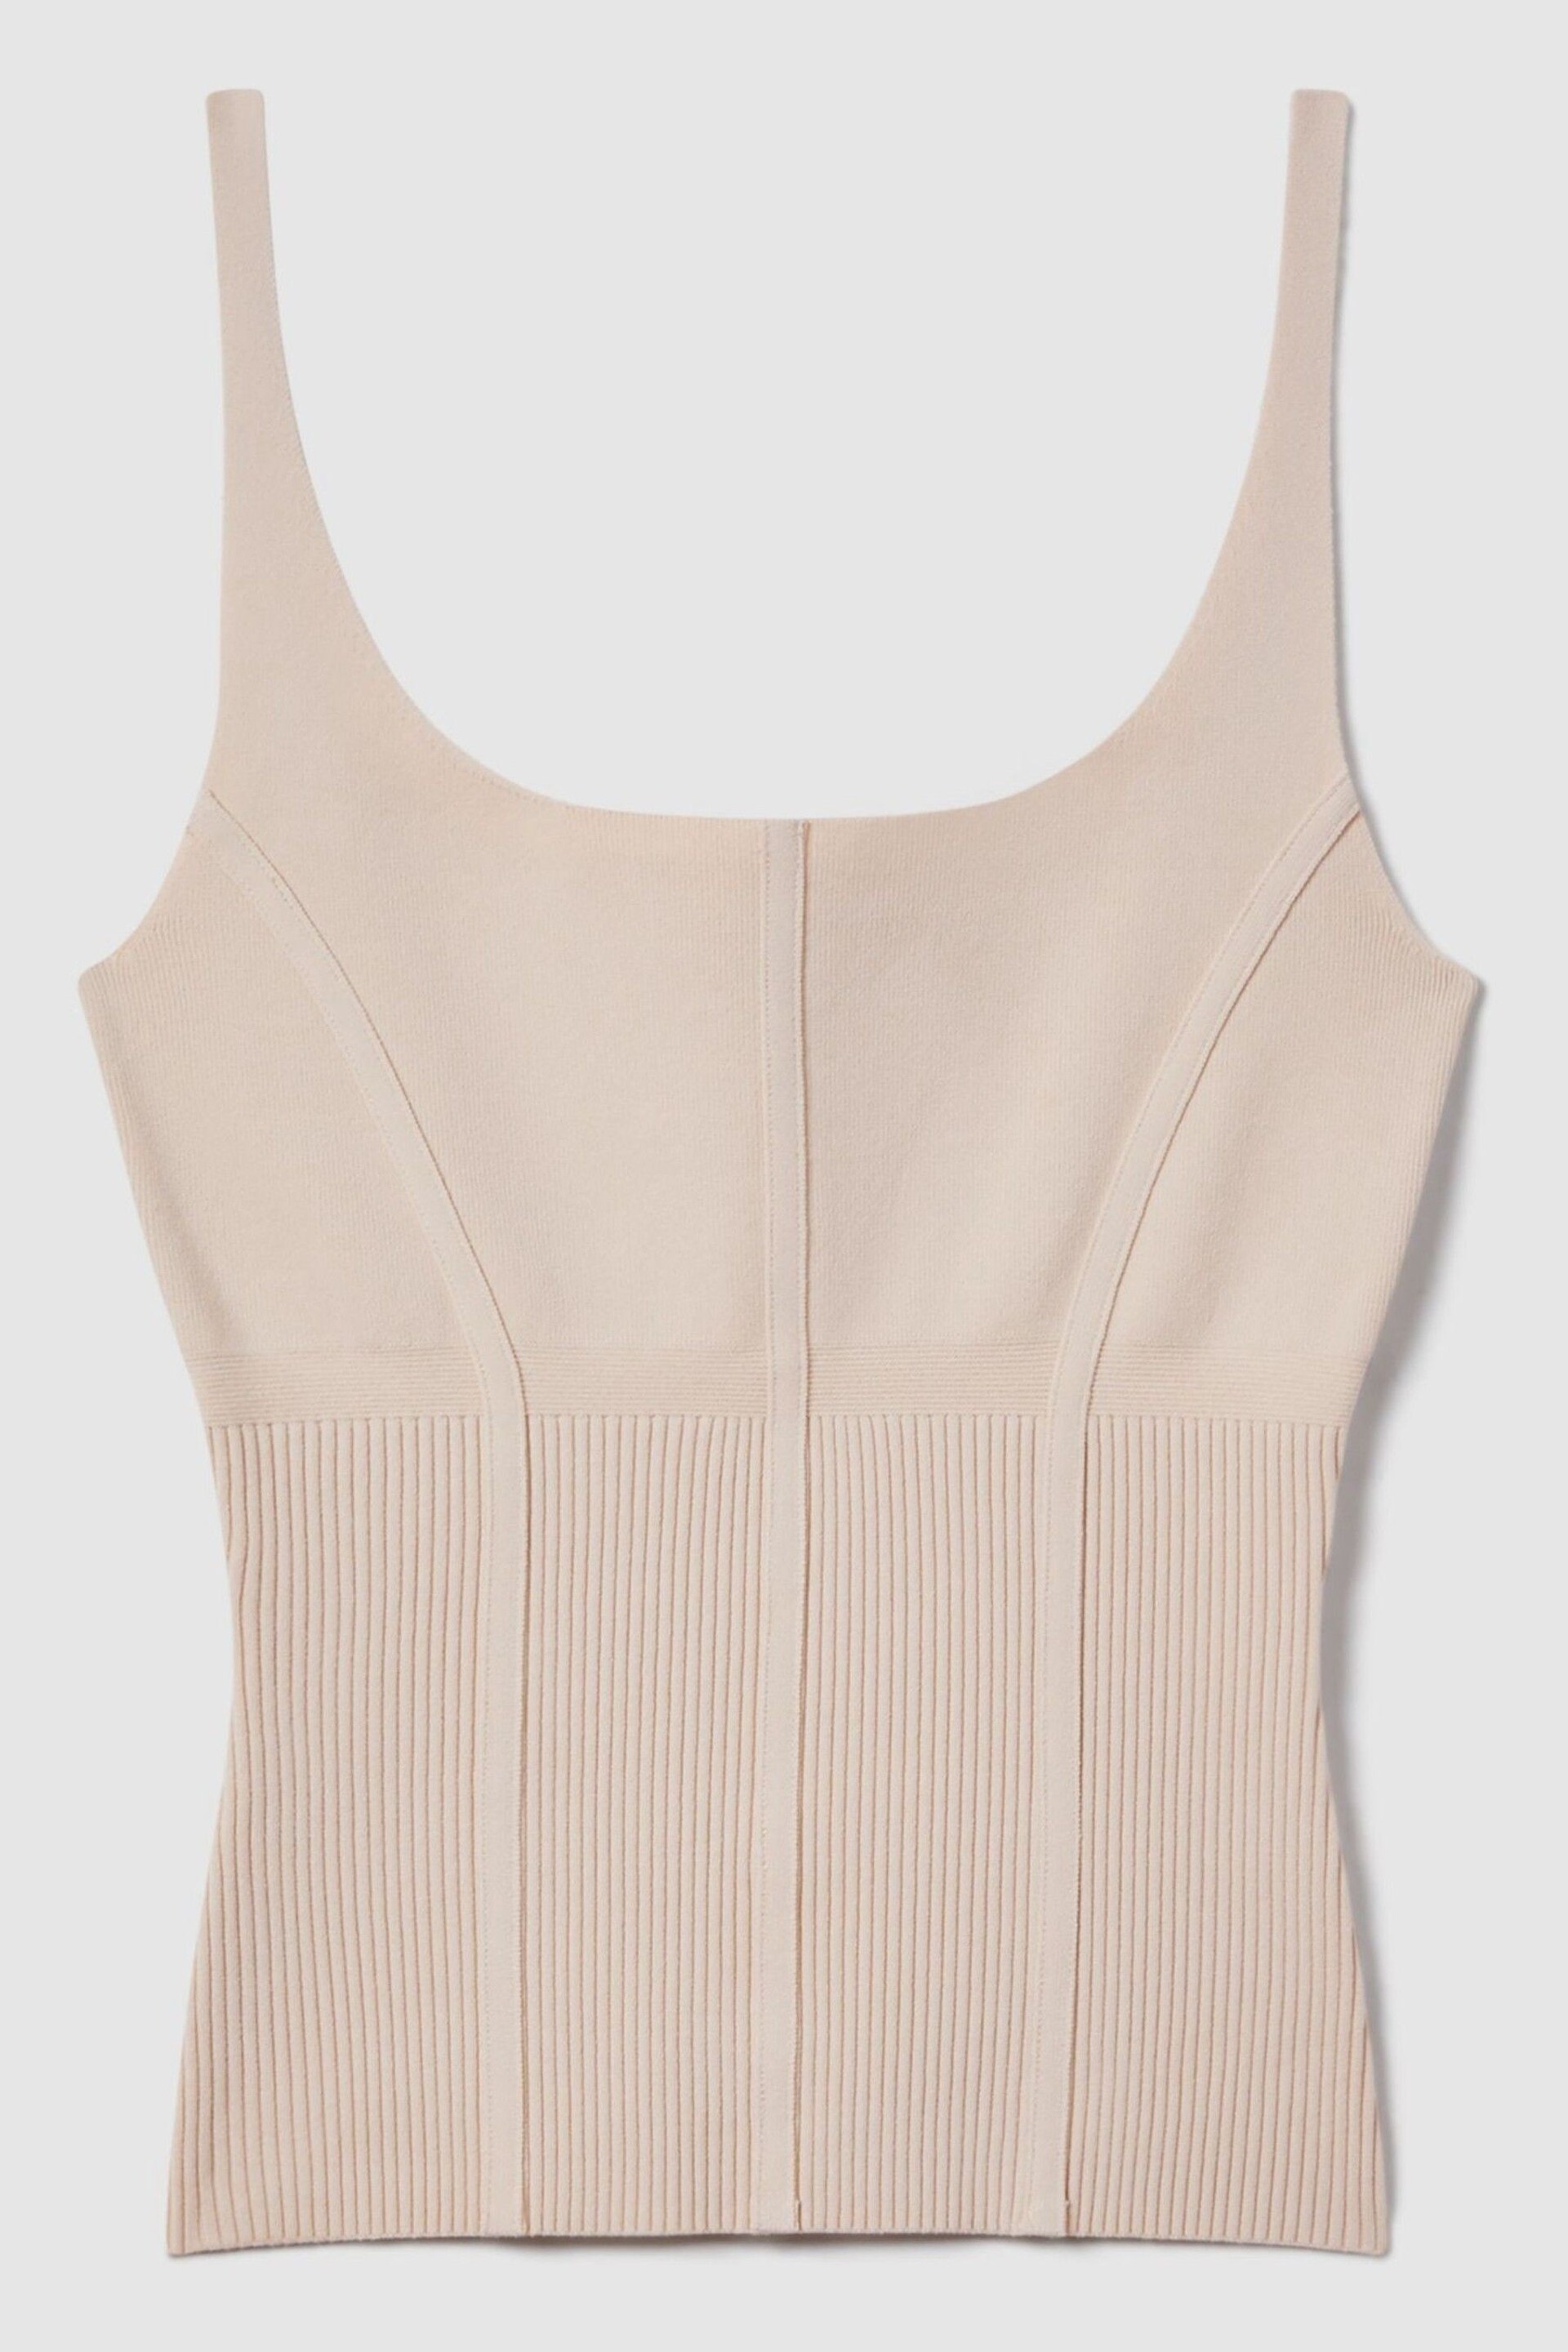 Reiss Nude Verity Ribbed Seam Detail Vest - Image 2 of 6